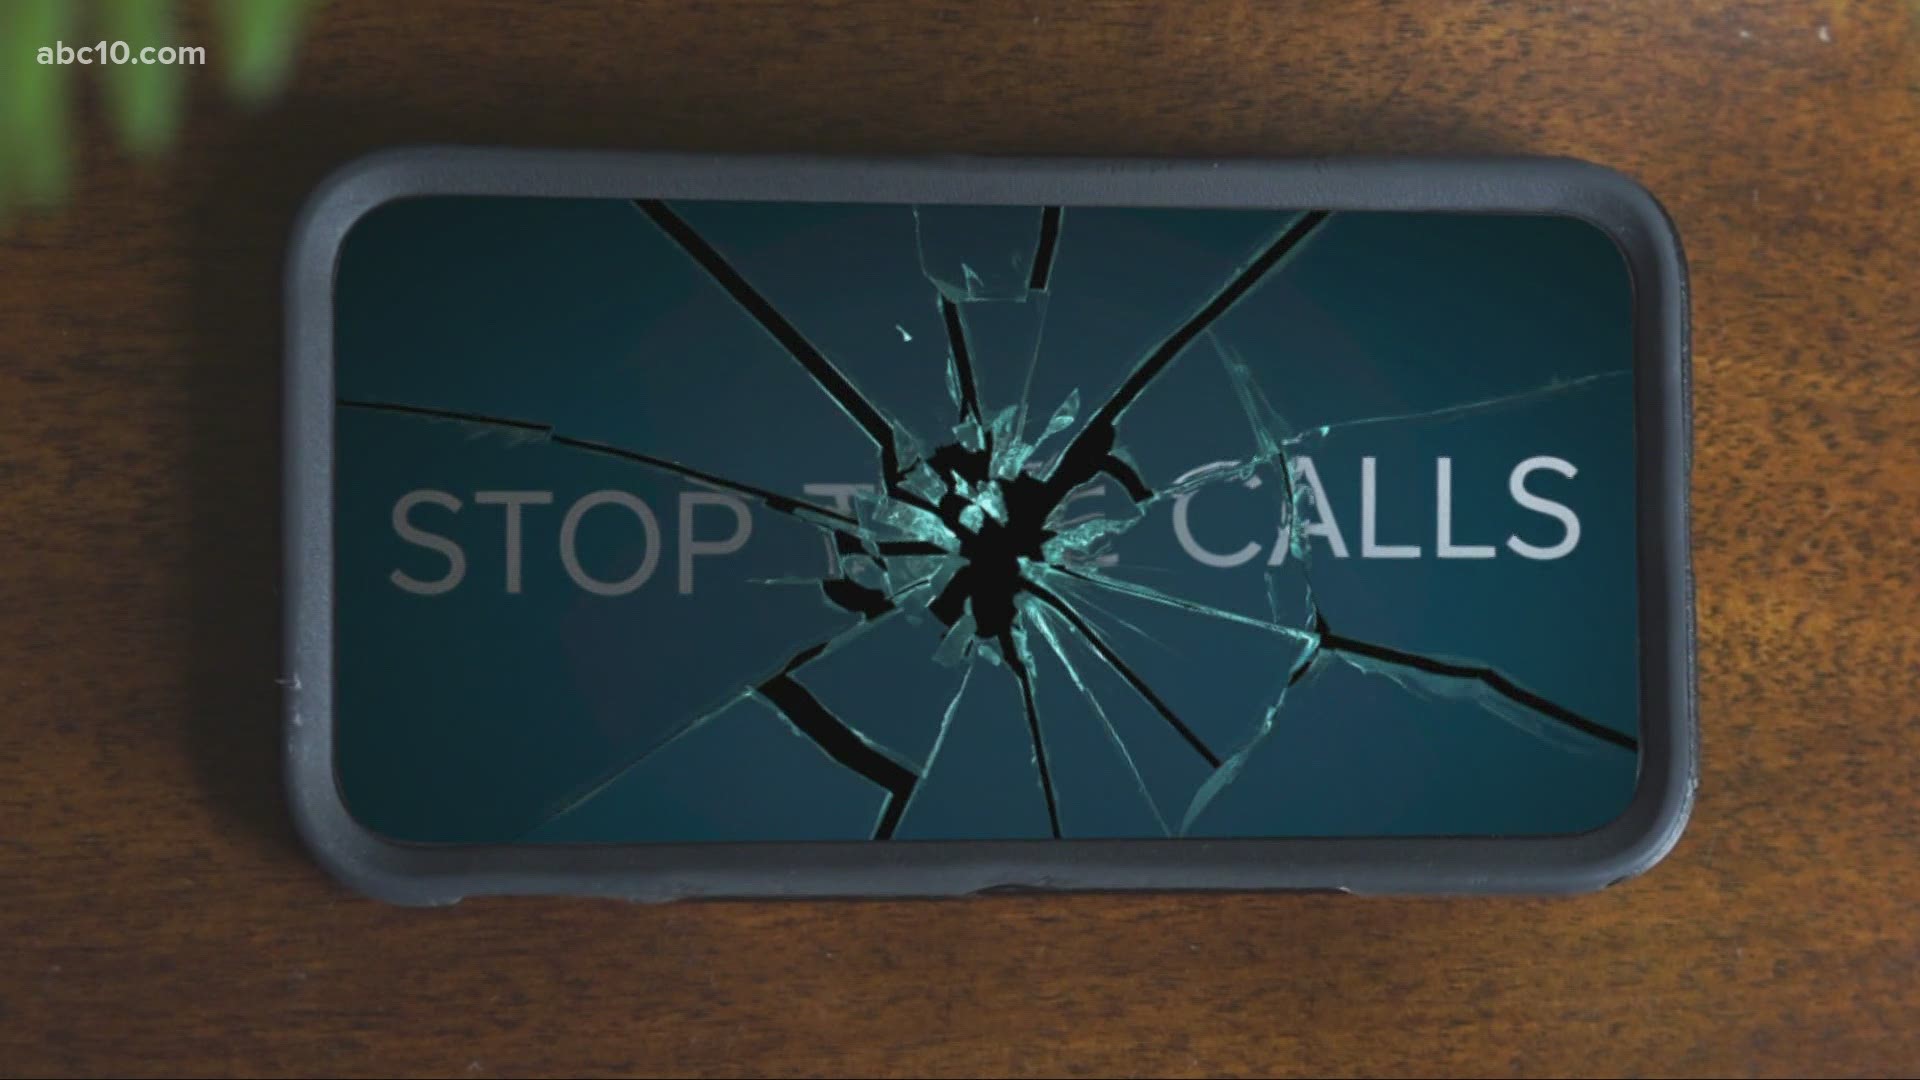 Here are tips on how to prevent your phone from getting robocalls.